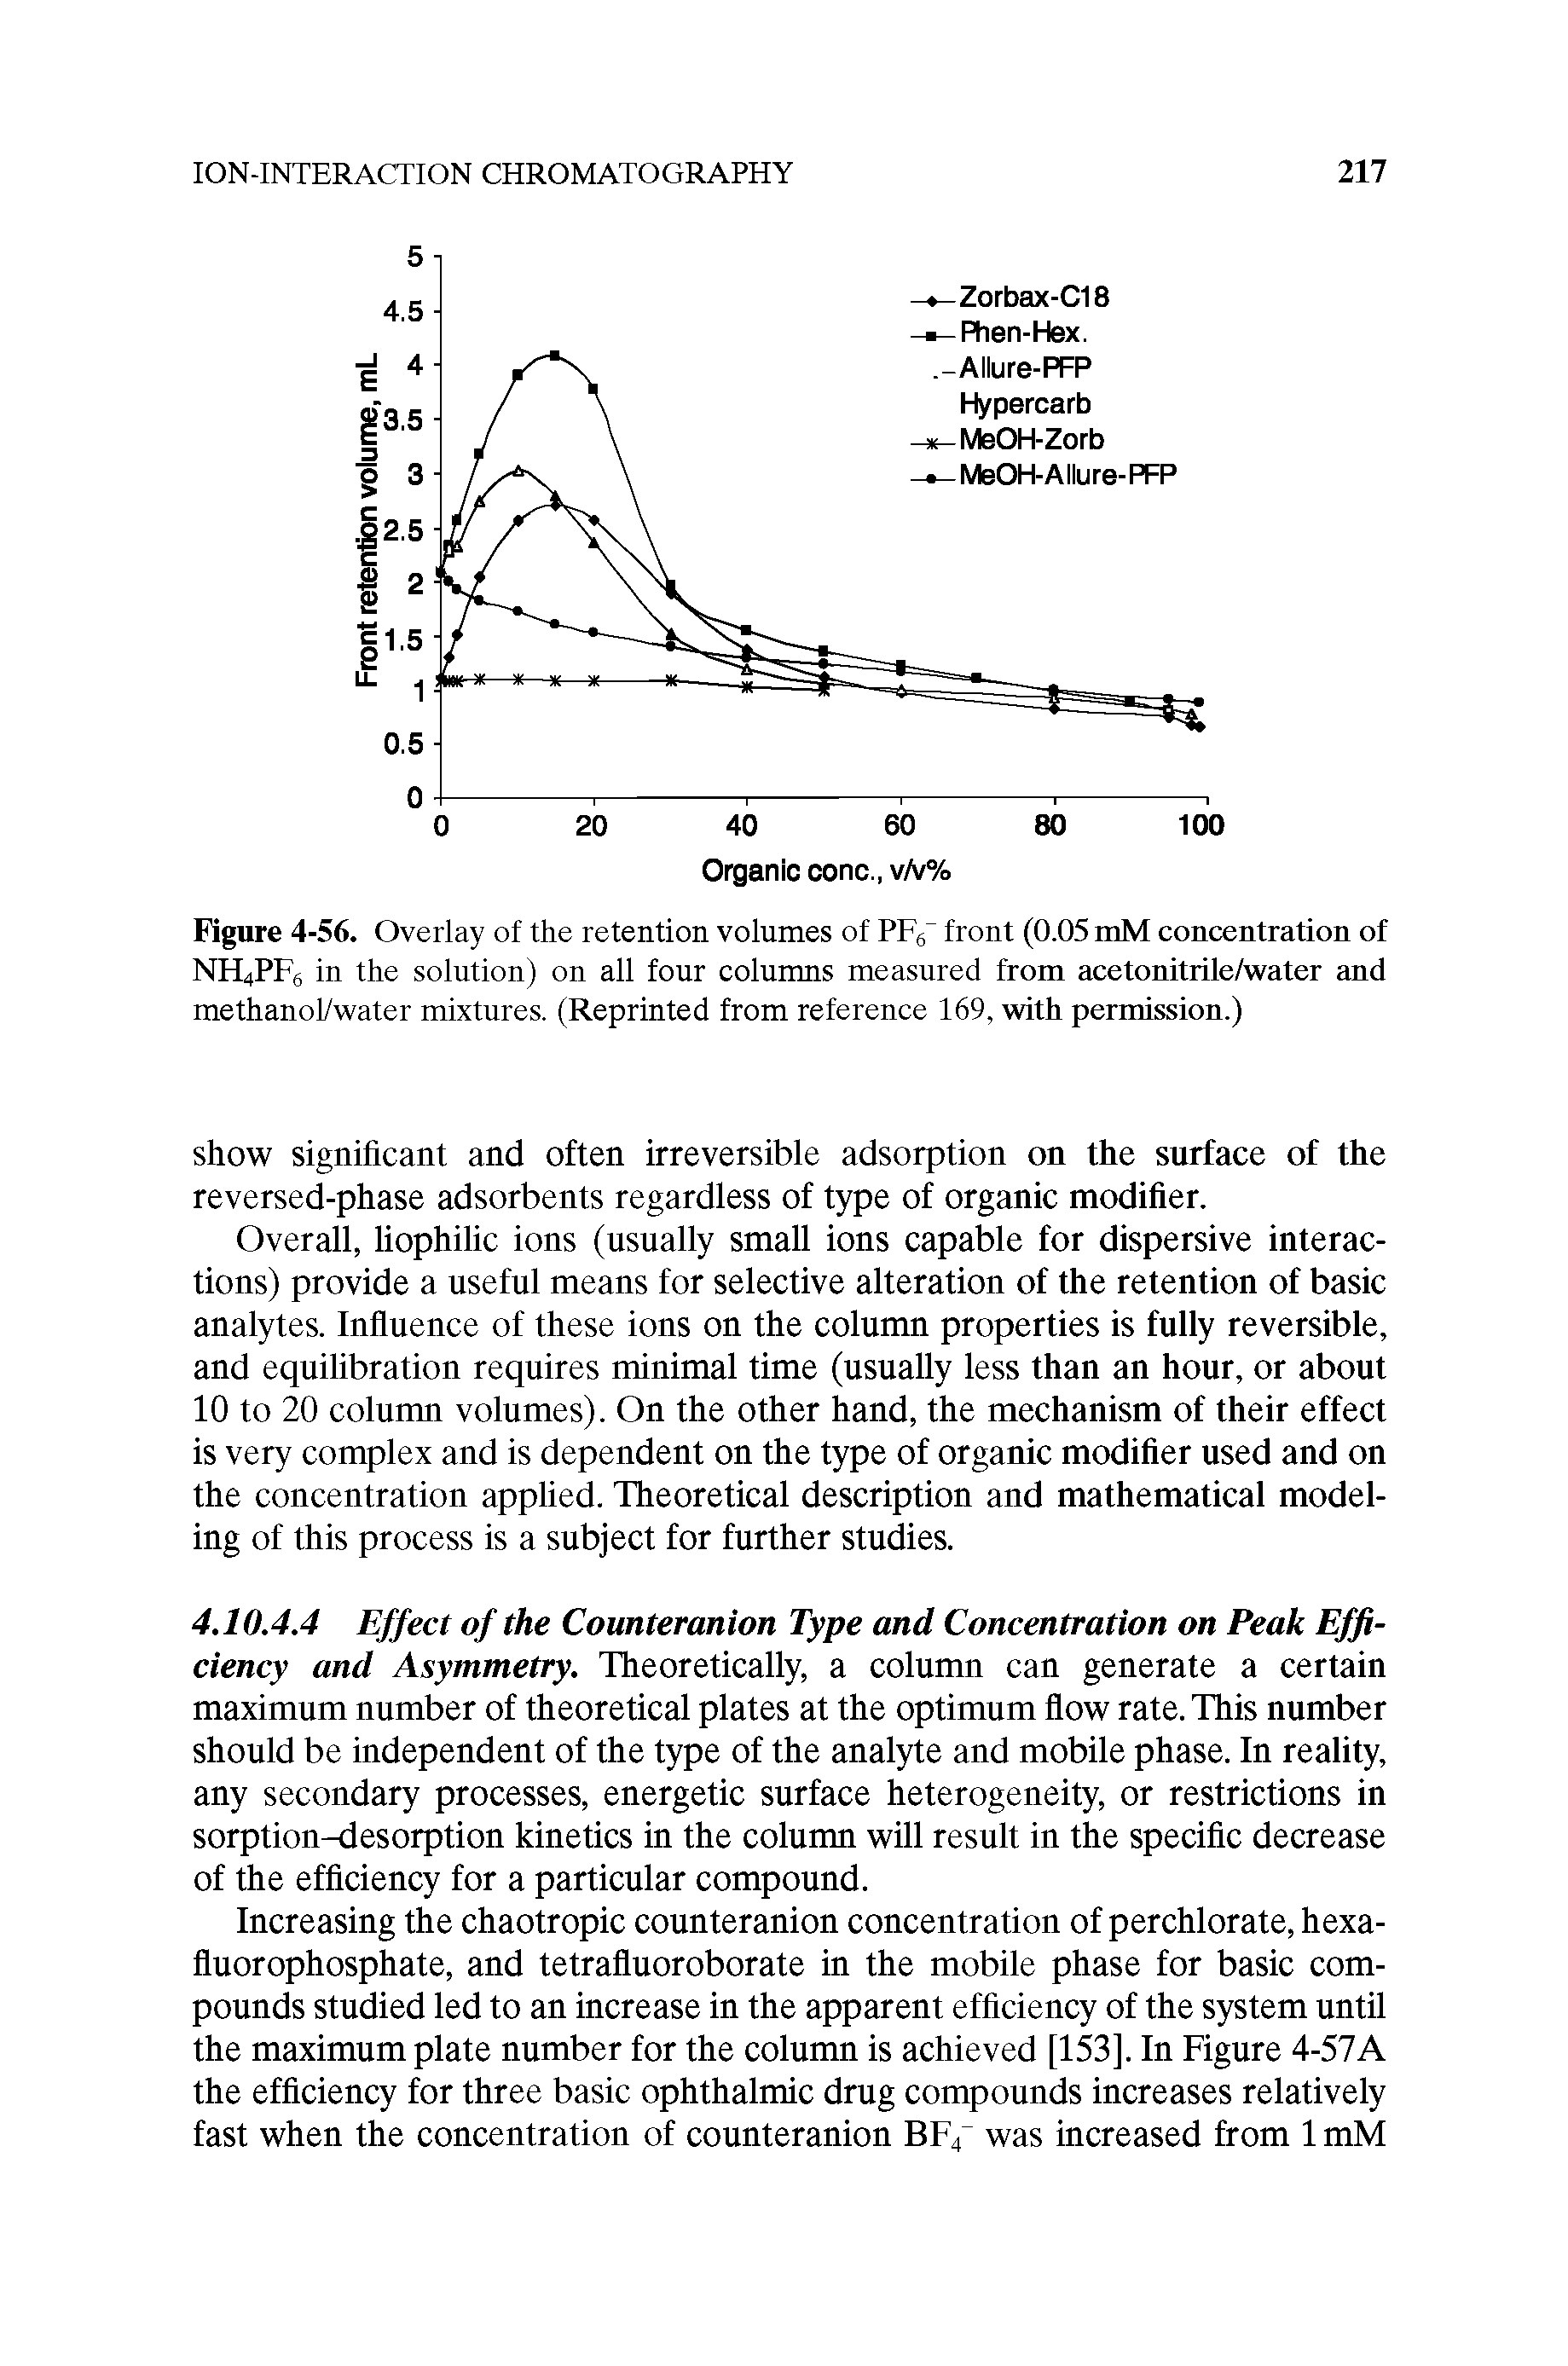 Figure 4-56. Overlay of the retention volumes of front (0.05 mM concentration of NH4PF6 in the solution) on all four columns measured from acetonitrile/water and methanol/water mixtures. (Reprinted from reference 169, with permission.)...